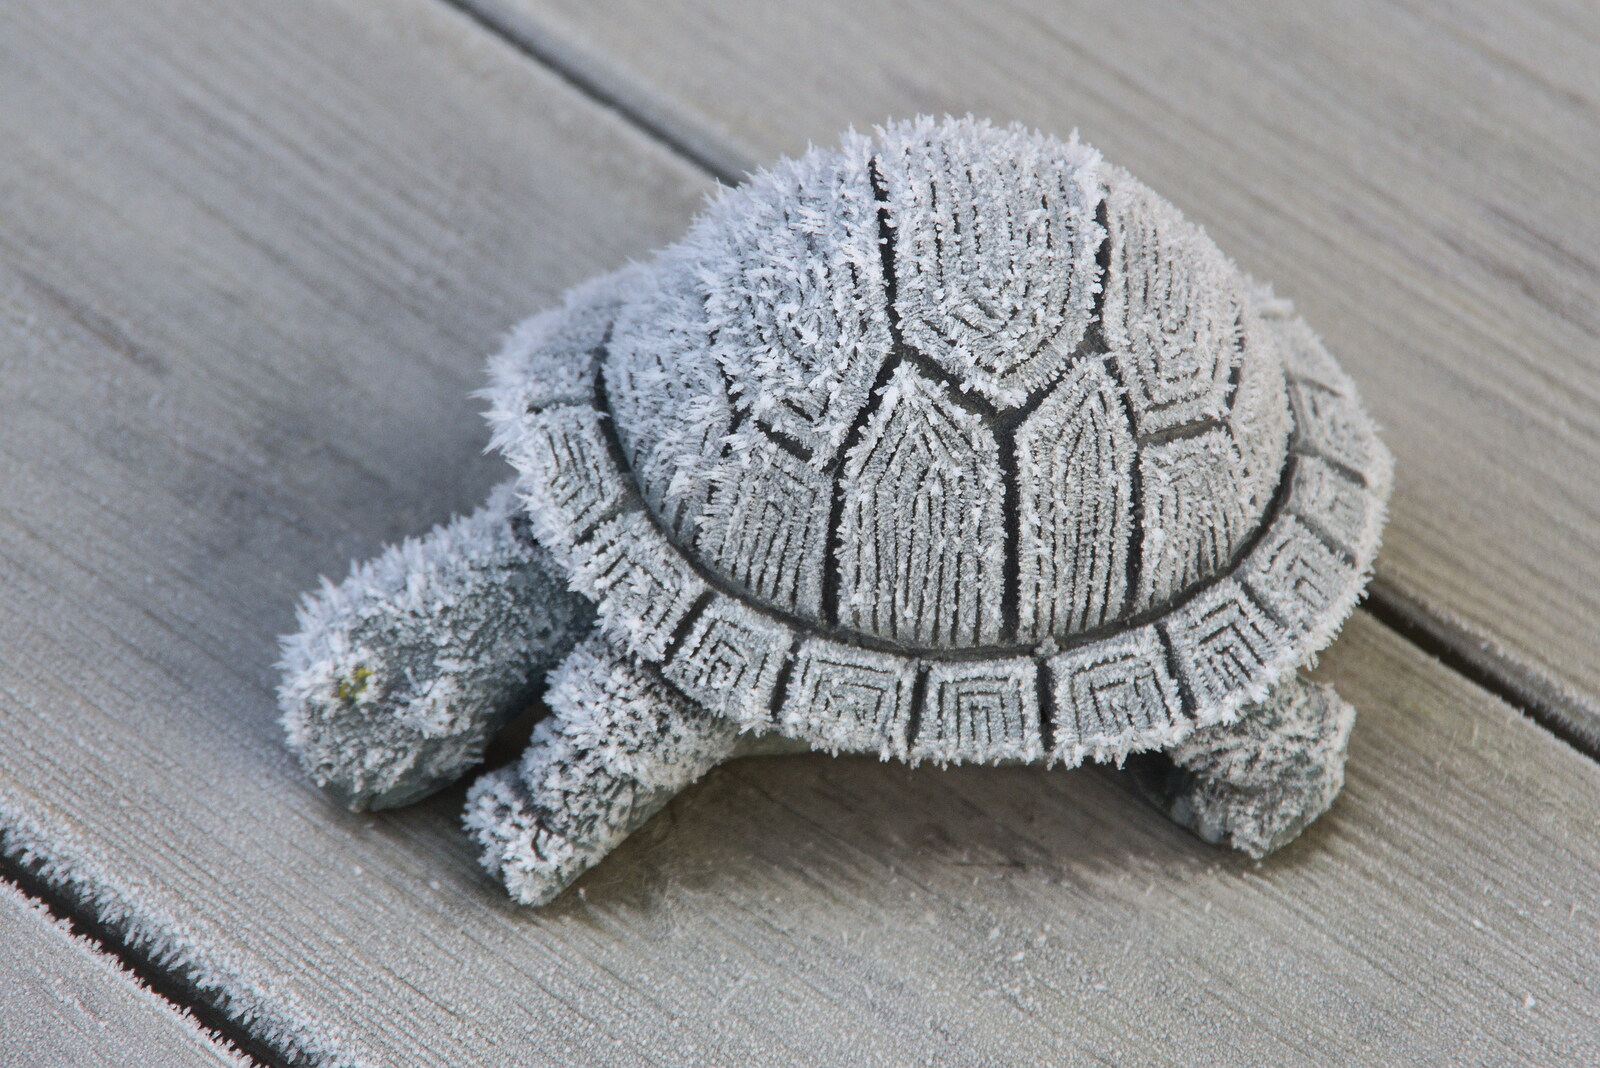 A Frosty Walk Around Brome, Suffolk - 22nd January 2023: A garden tortoise is covered in ice-fur